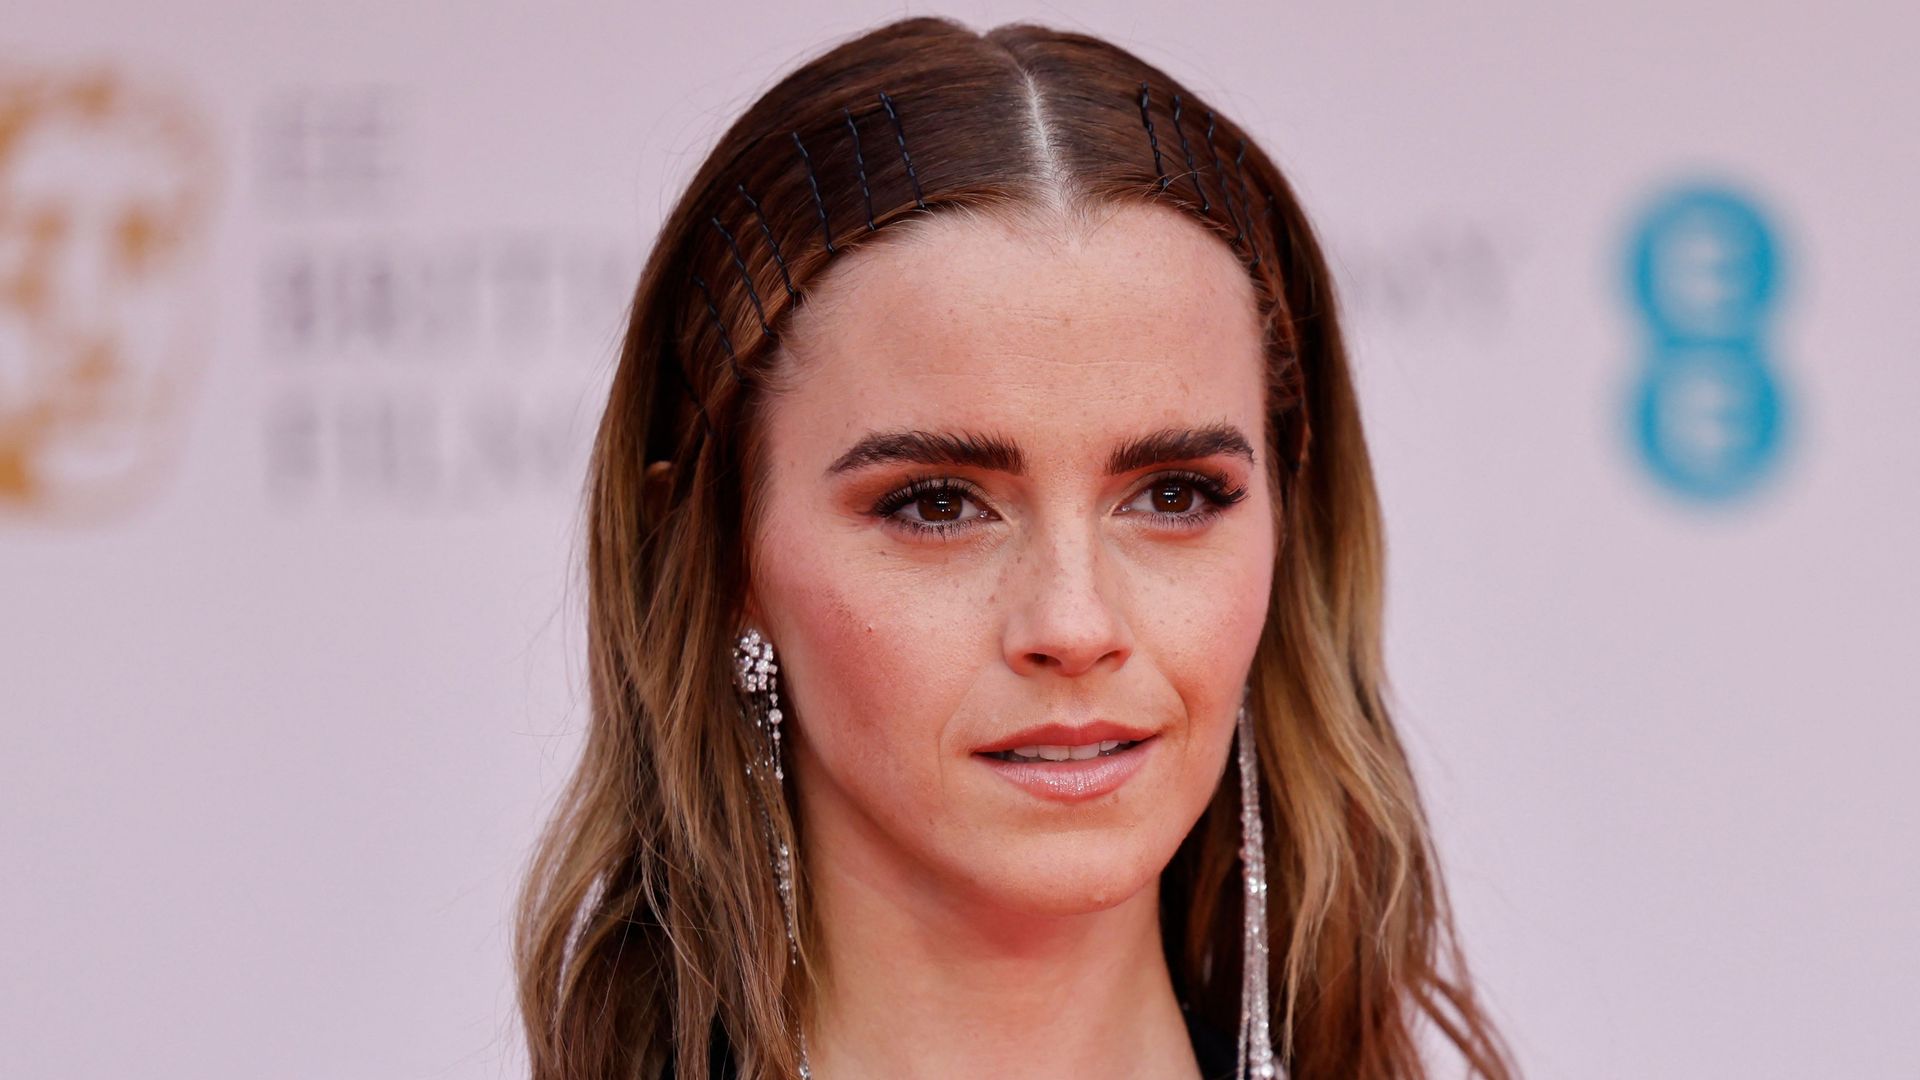 British actress Emma Watson poses on the red carpet upon arrival at the BAFTA British Academy Film Awards at the Royal Albert Hall, in London, on March 13, 2022